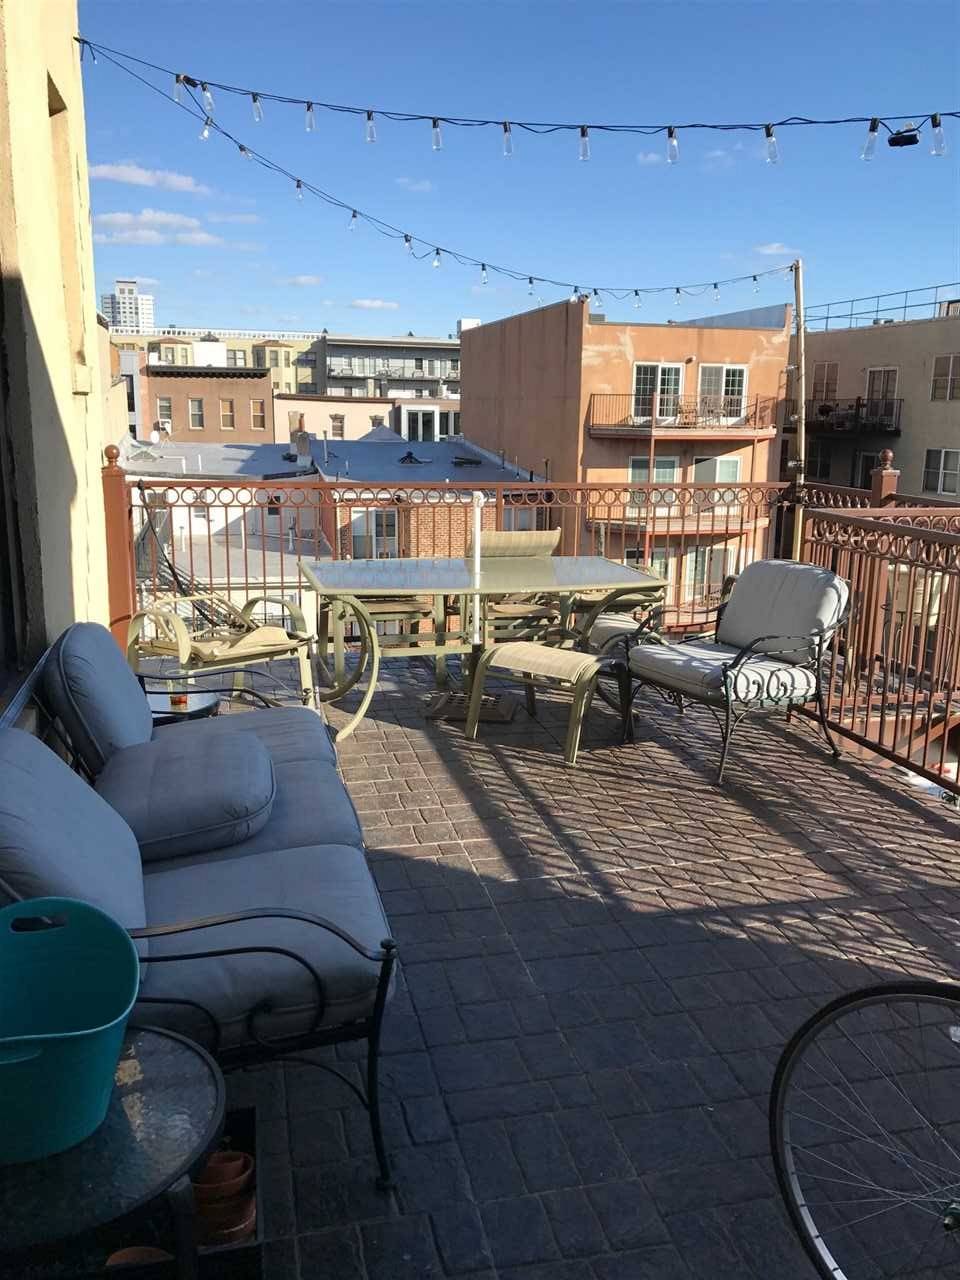 Outdoor space galore & beautiful renovation in this large condo